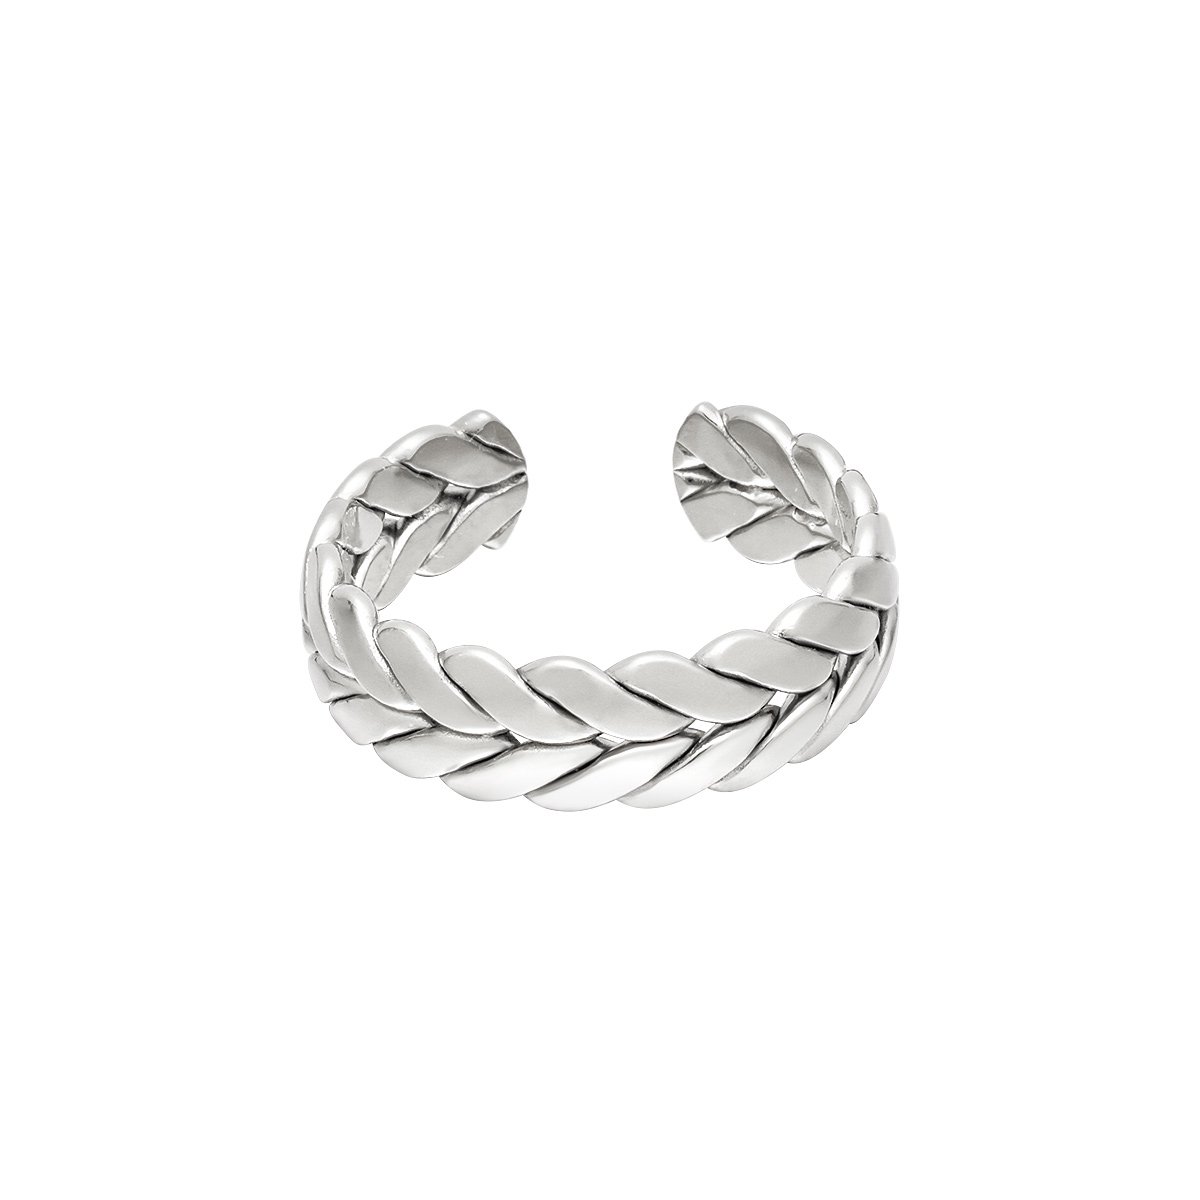 Ring Connected - Zilver - Stainless Steel - Nikkelvrij - One Size